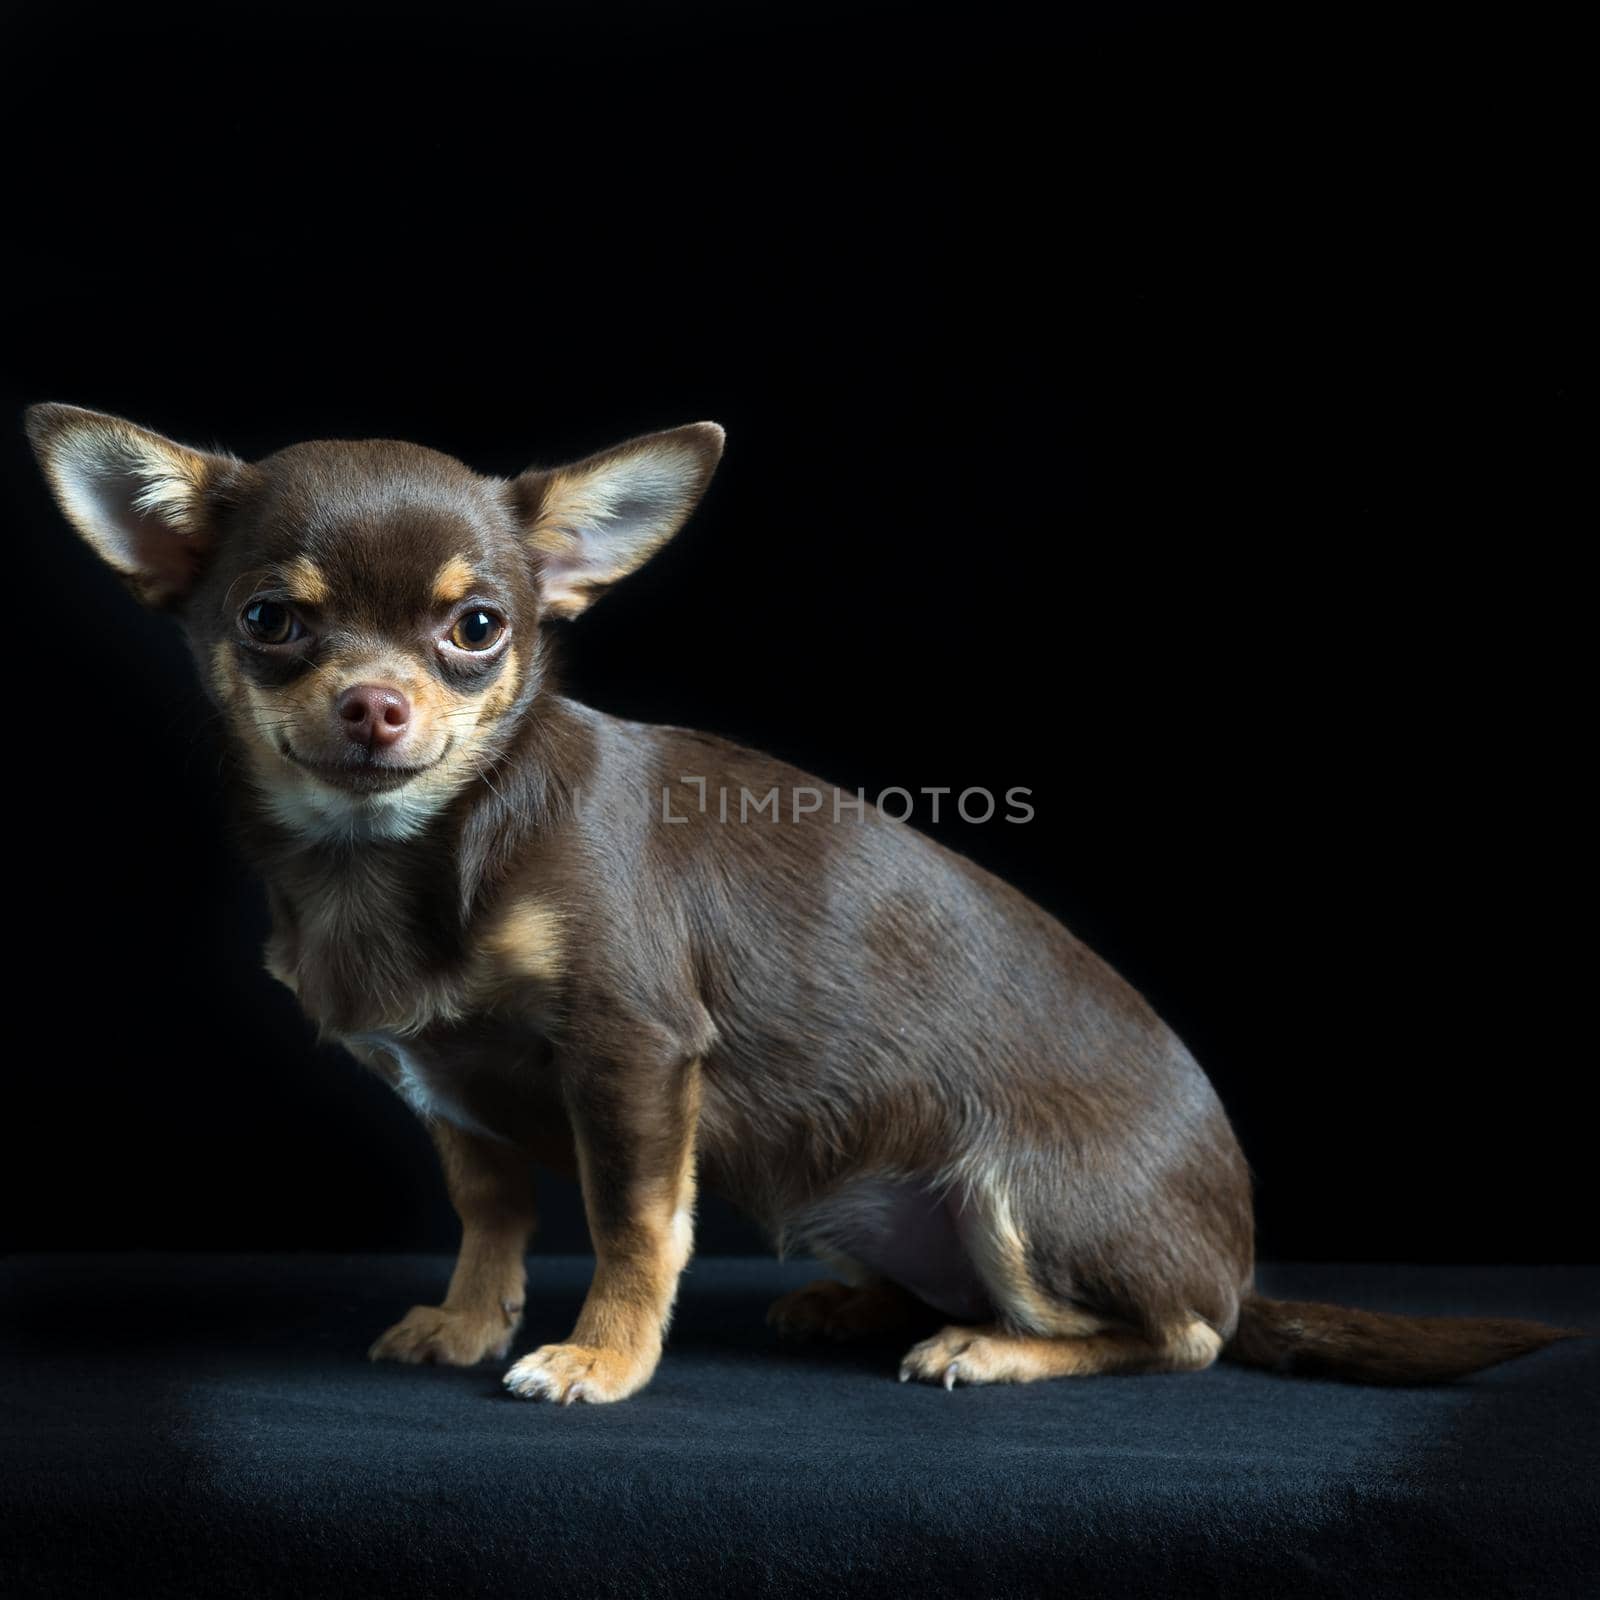 Little multicolored chihuahua in black background by LeoniekvanderVliet